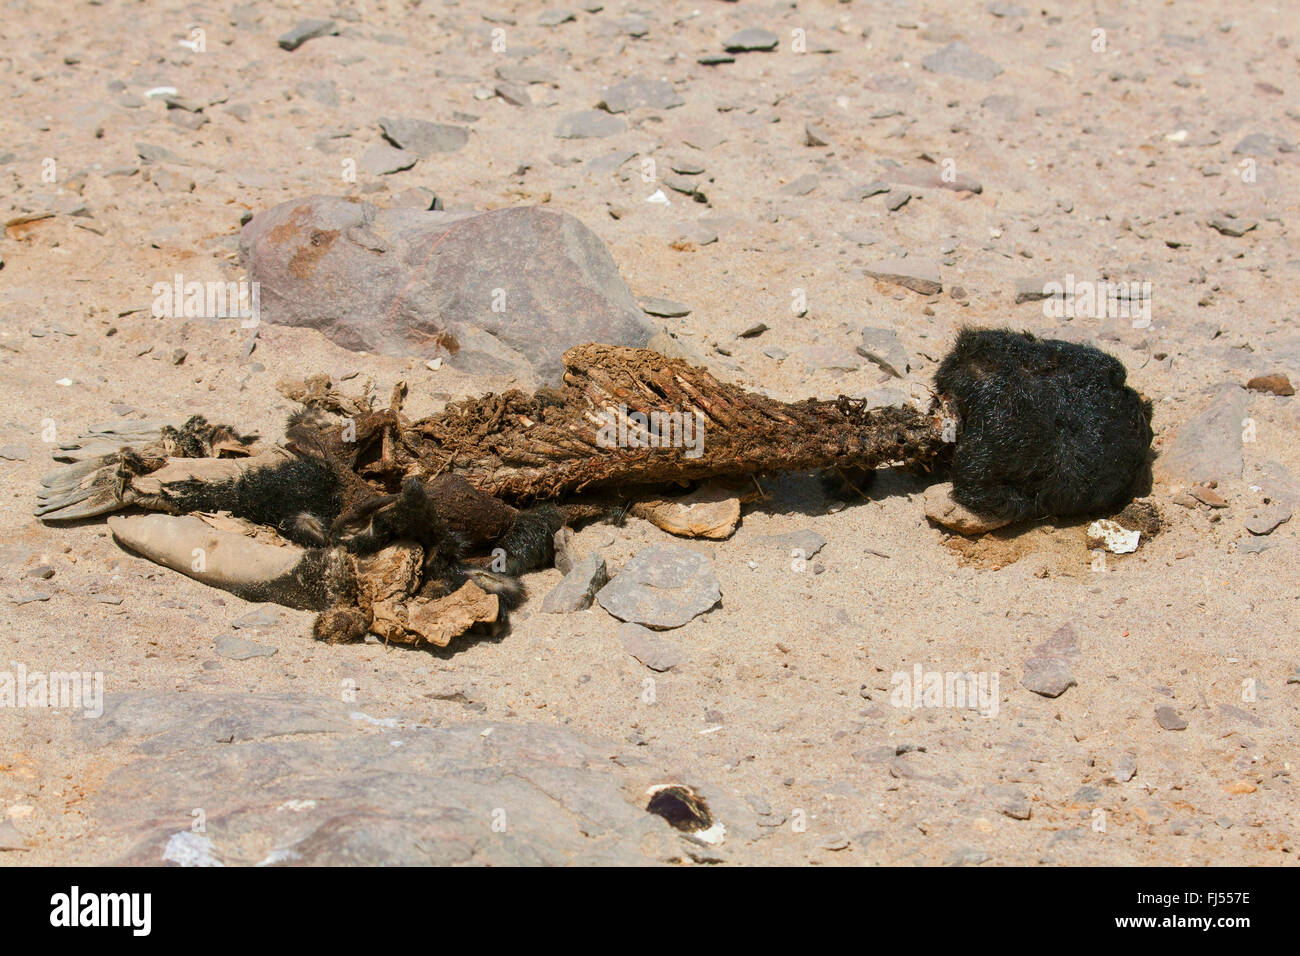 South African fur seal, Cape fur seal (Arctocephalus pusillus pusillus, Arctocephalus pusillus), skeletonized seal pup lying in the sand, Namibia, Cape Cross seal reserve, Cape Cross seal reserve Stock Photo